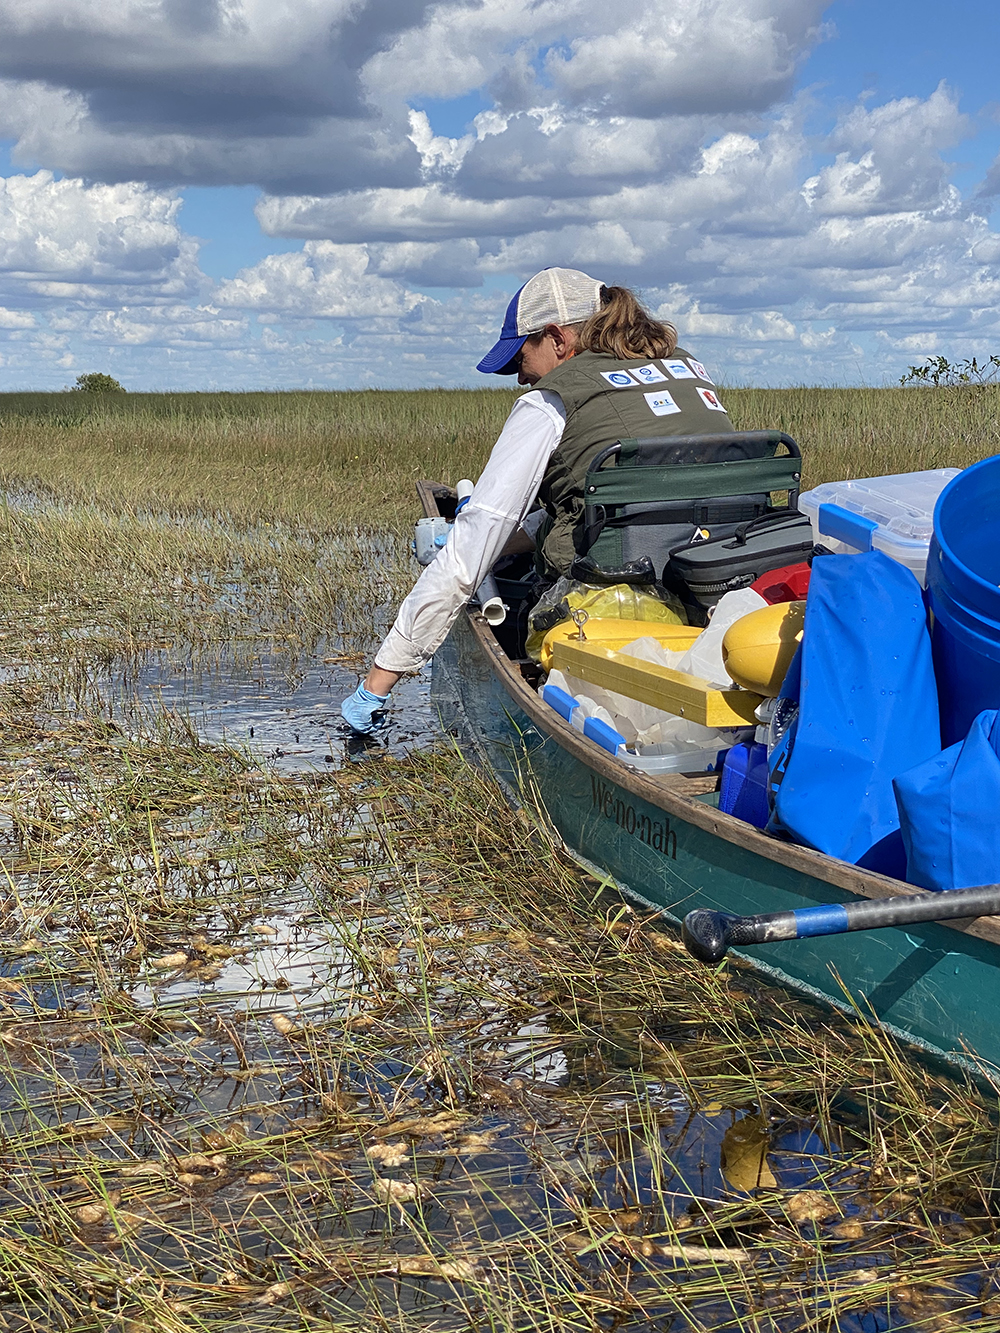 Dr. Baker samples the Everglades during the 2022 Willoughby Expedition to test for chemistry changes and pollutants. Photo courtesy of Willoughby Expedition.